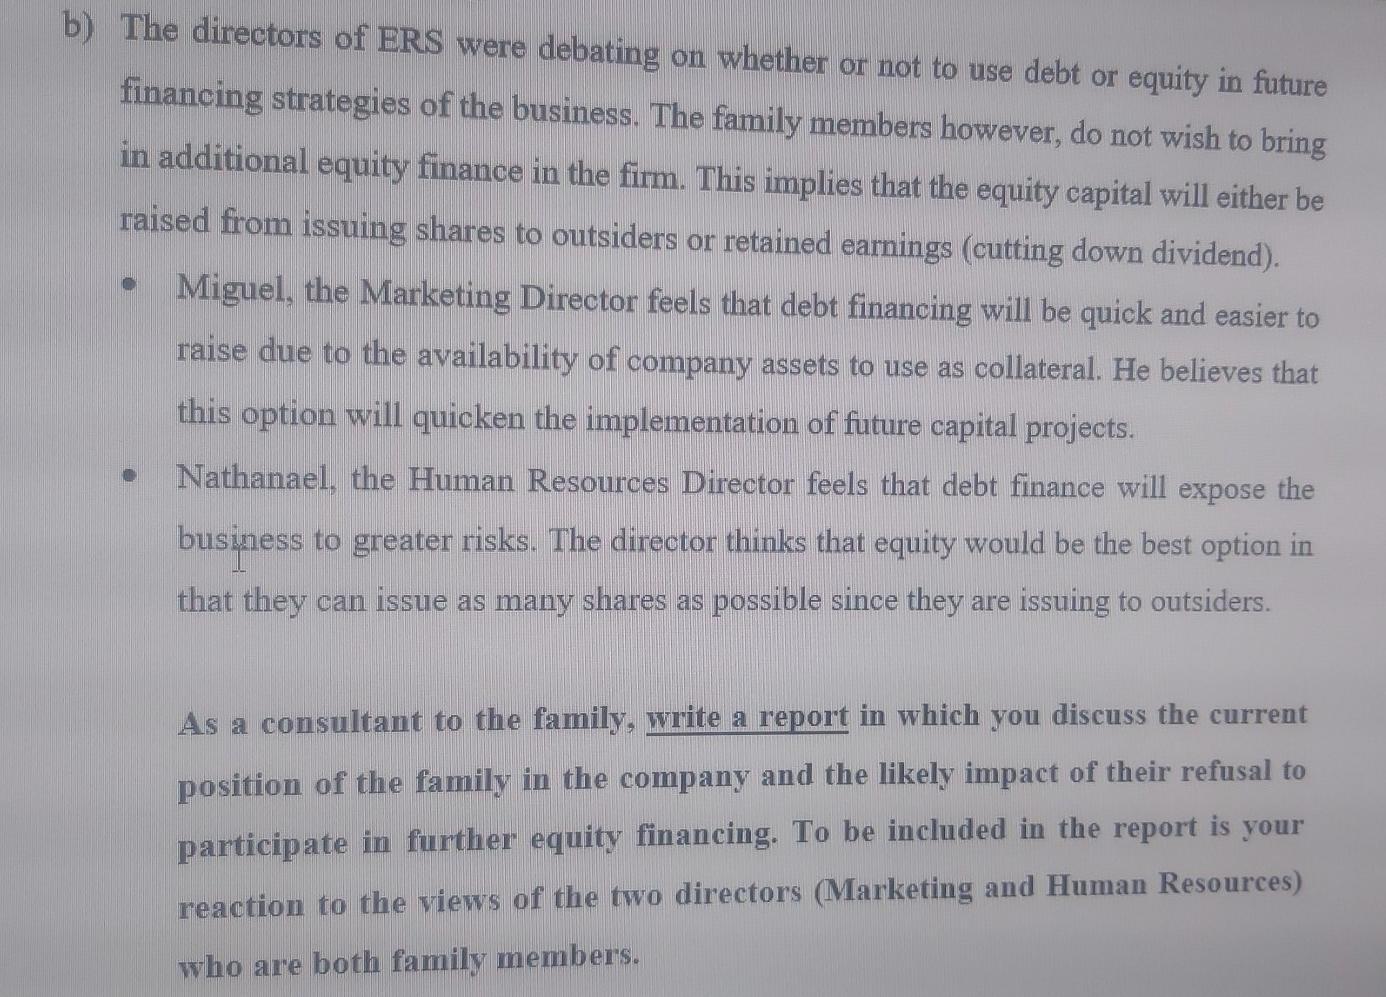 b) The directors of ERS were debating on whether or not to use debt or equity in future financing strategies of the business.